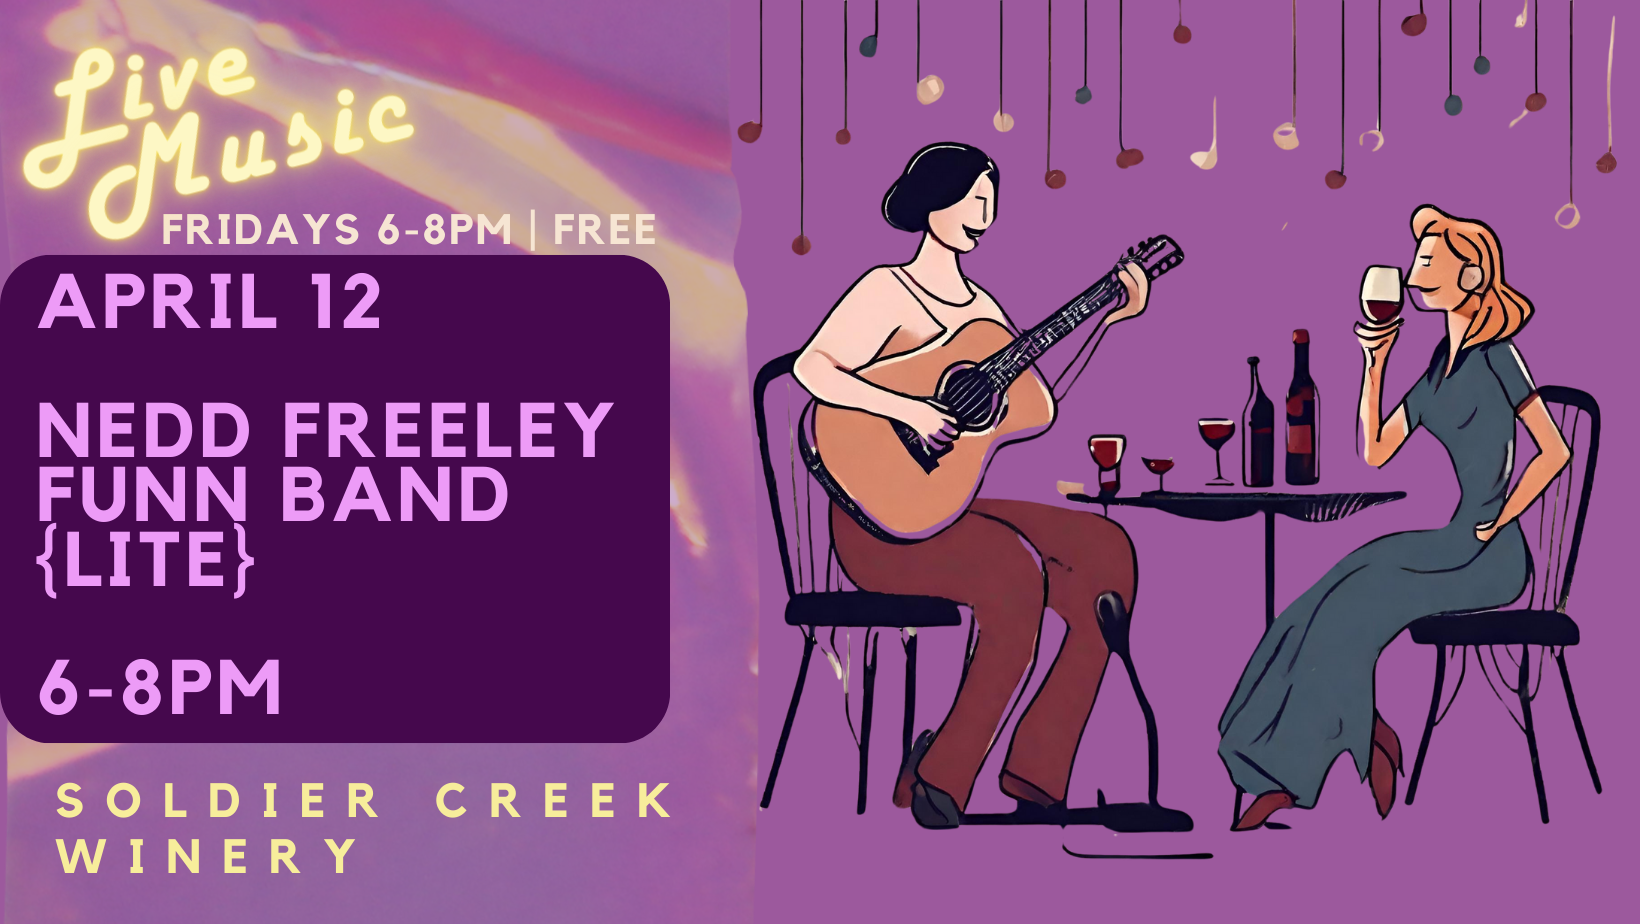 free live music every friday at soldier creek winery. april 12 is nedd freeley funn band lite.